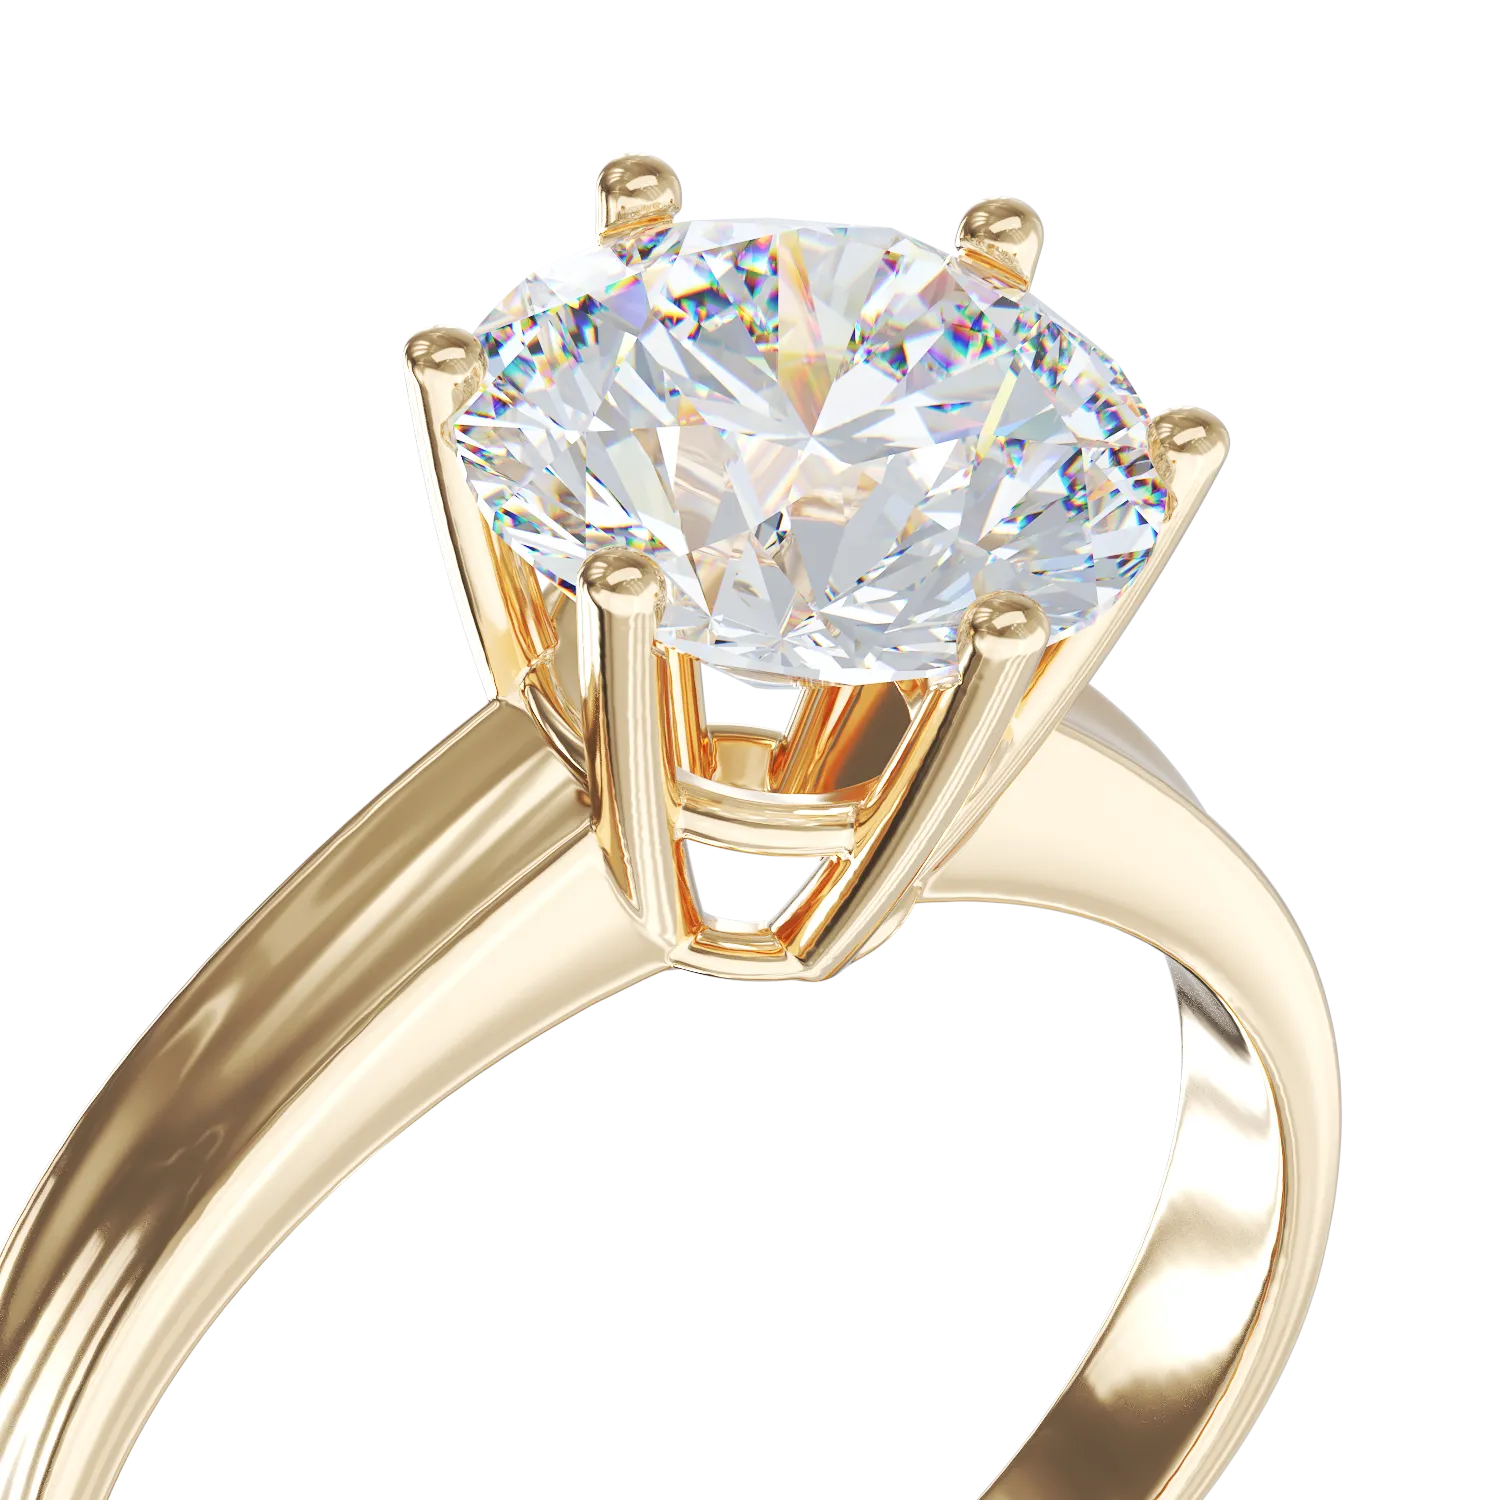 Yellow gold engagement ring